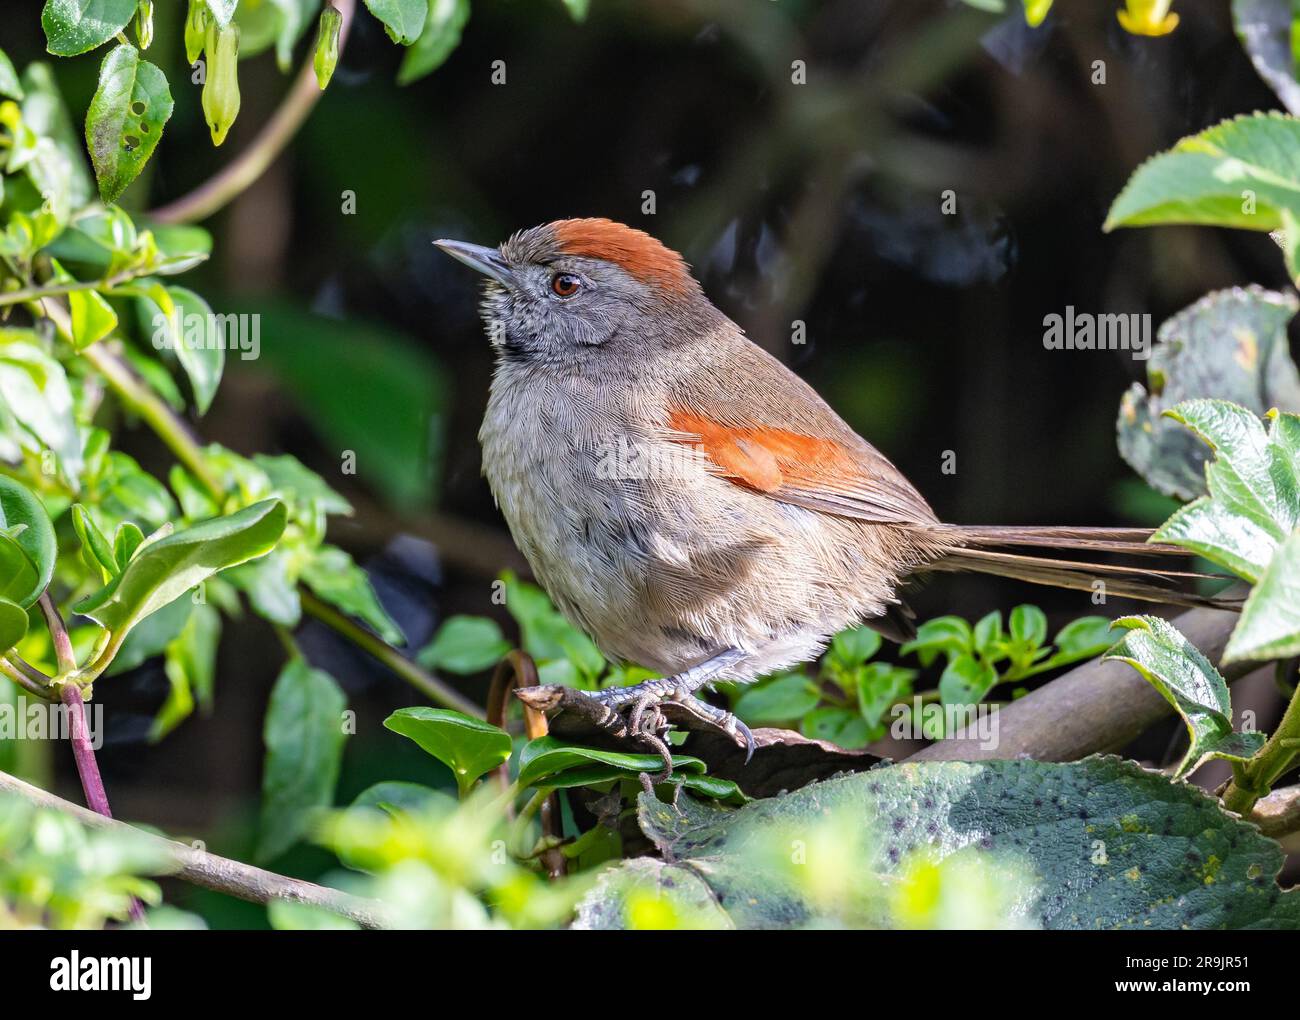 A Silvery-throated Spinetail (Synallaxis subpudica) perched on a branch. Colombia, South America. Stock Photo